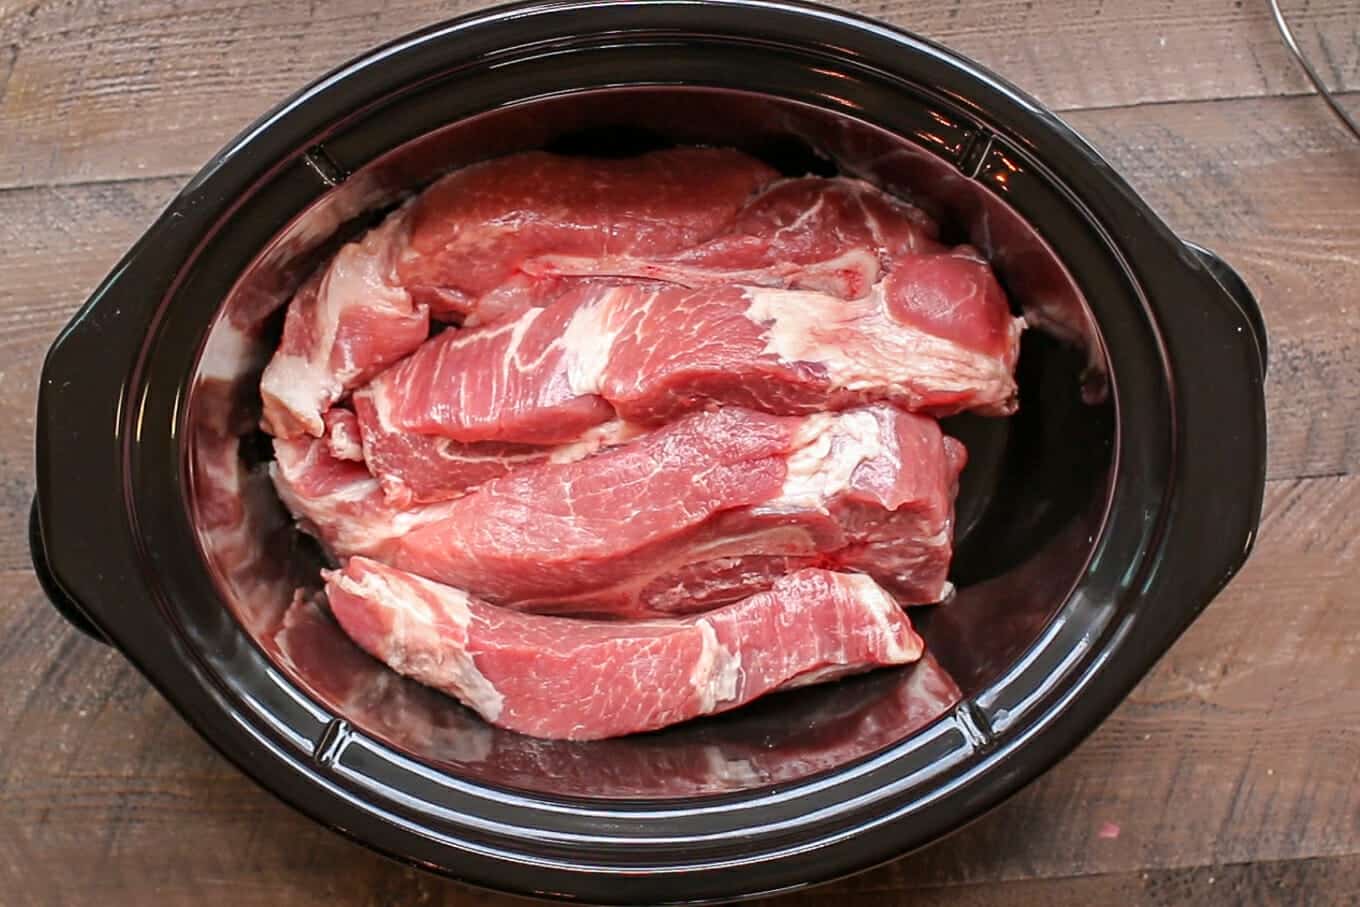 raw country style ribs in a slow cooker.